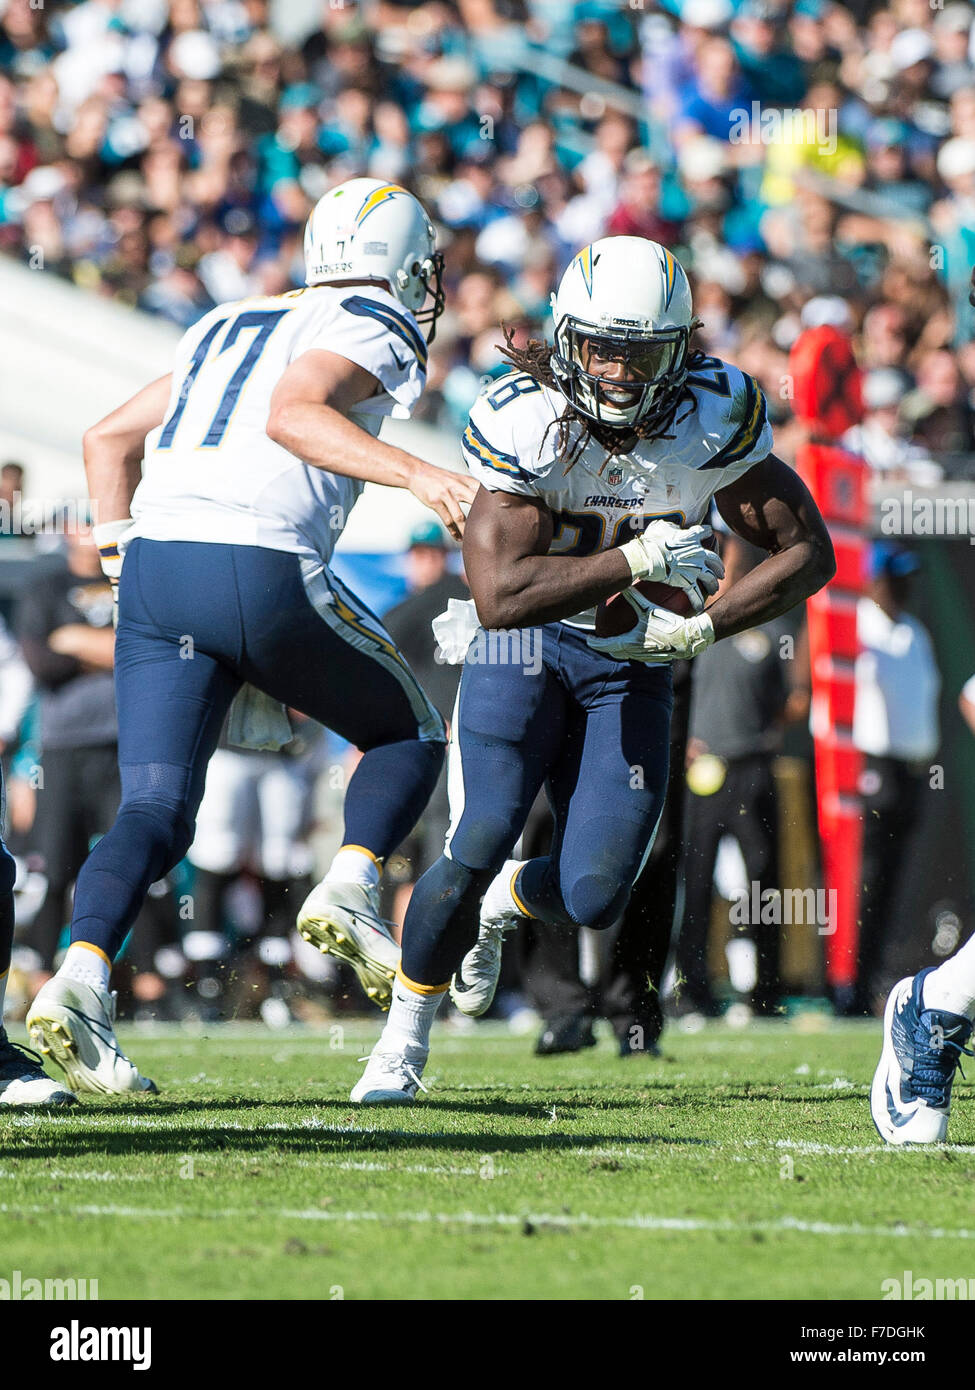 Jacksonville, FL, USA. 29th Nov, 2015.  d17 hands the ball off to San Diego Chargers running back Melvin Gordon (28) during 1st half NFL game action between the San Diego Chargers and the Jacksonville Jaguars at EverBank Field in Jacksonville, Fl. Romeo T Guzman/CSM/Alamy Live News Stock Photo